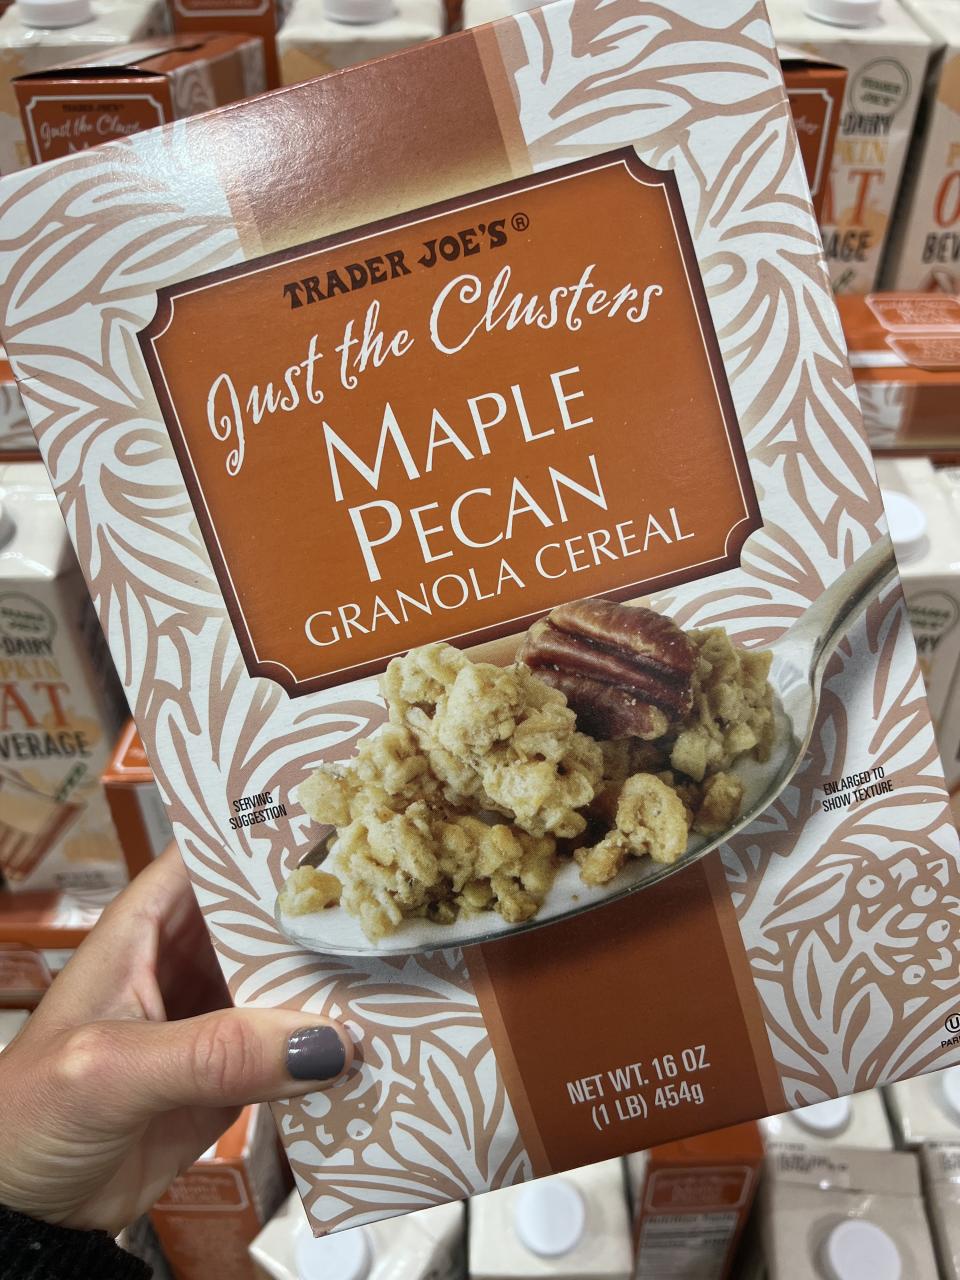 Just the Clusters Maple Pecan Granola Cereal